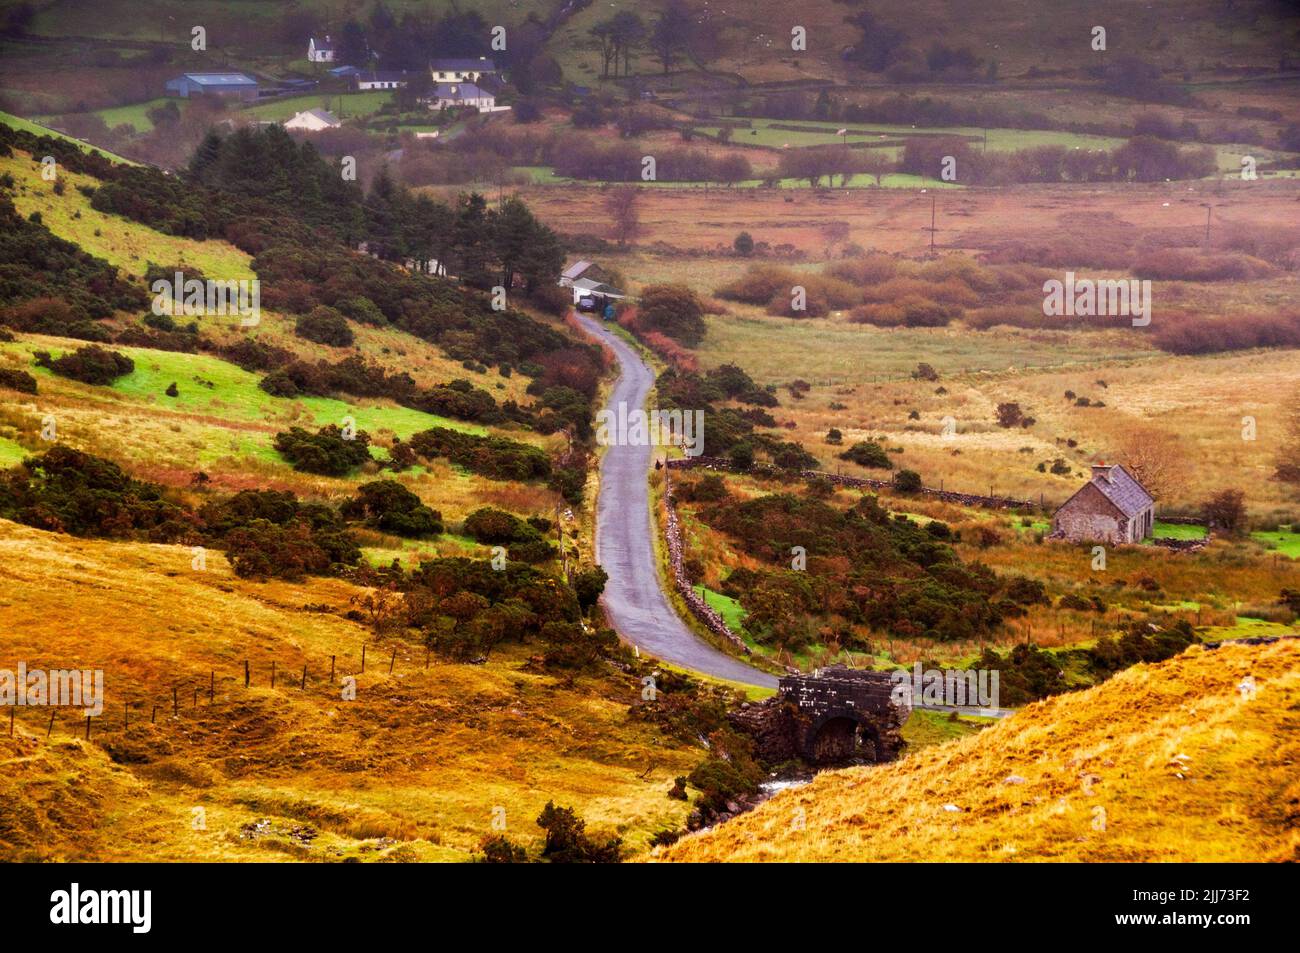 Mountain pass in the mountains of Maumtrasna on the west coast of Ireland. Stock Photo